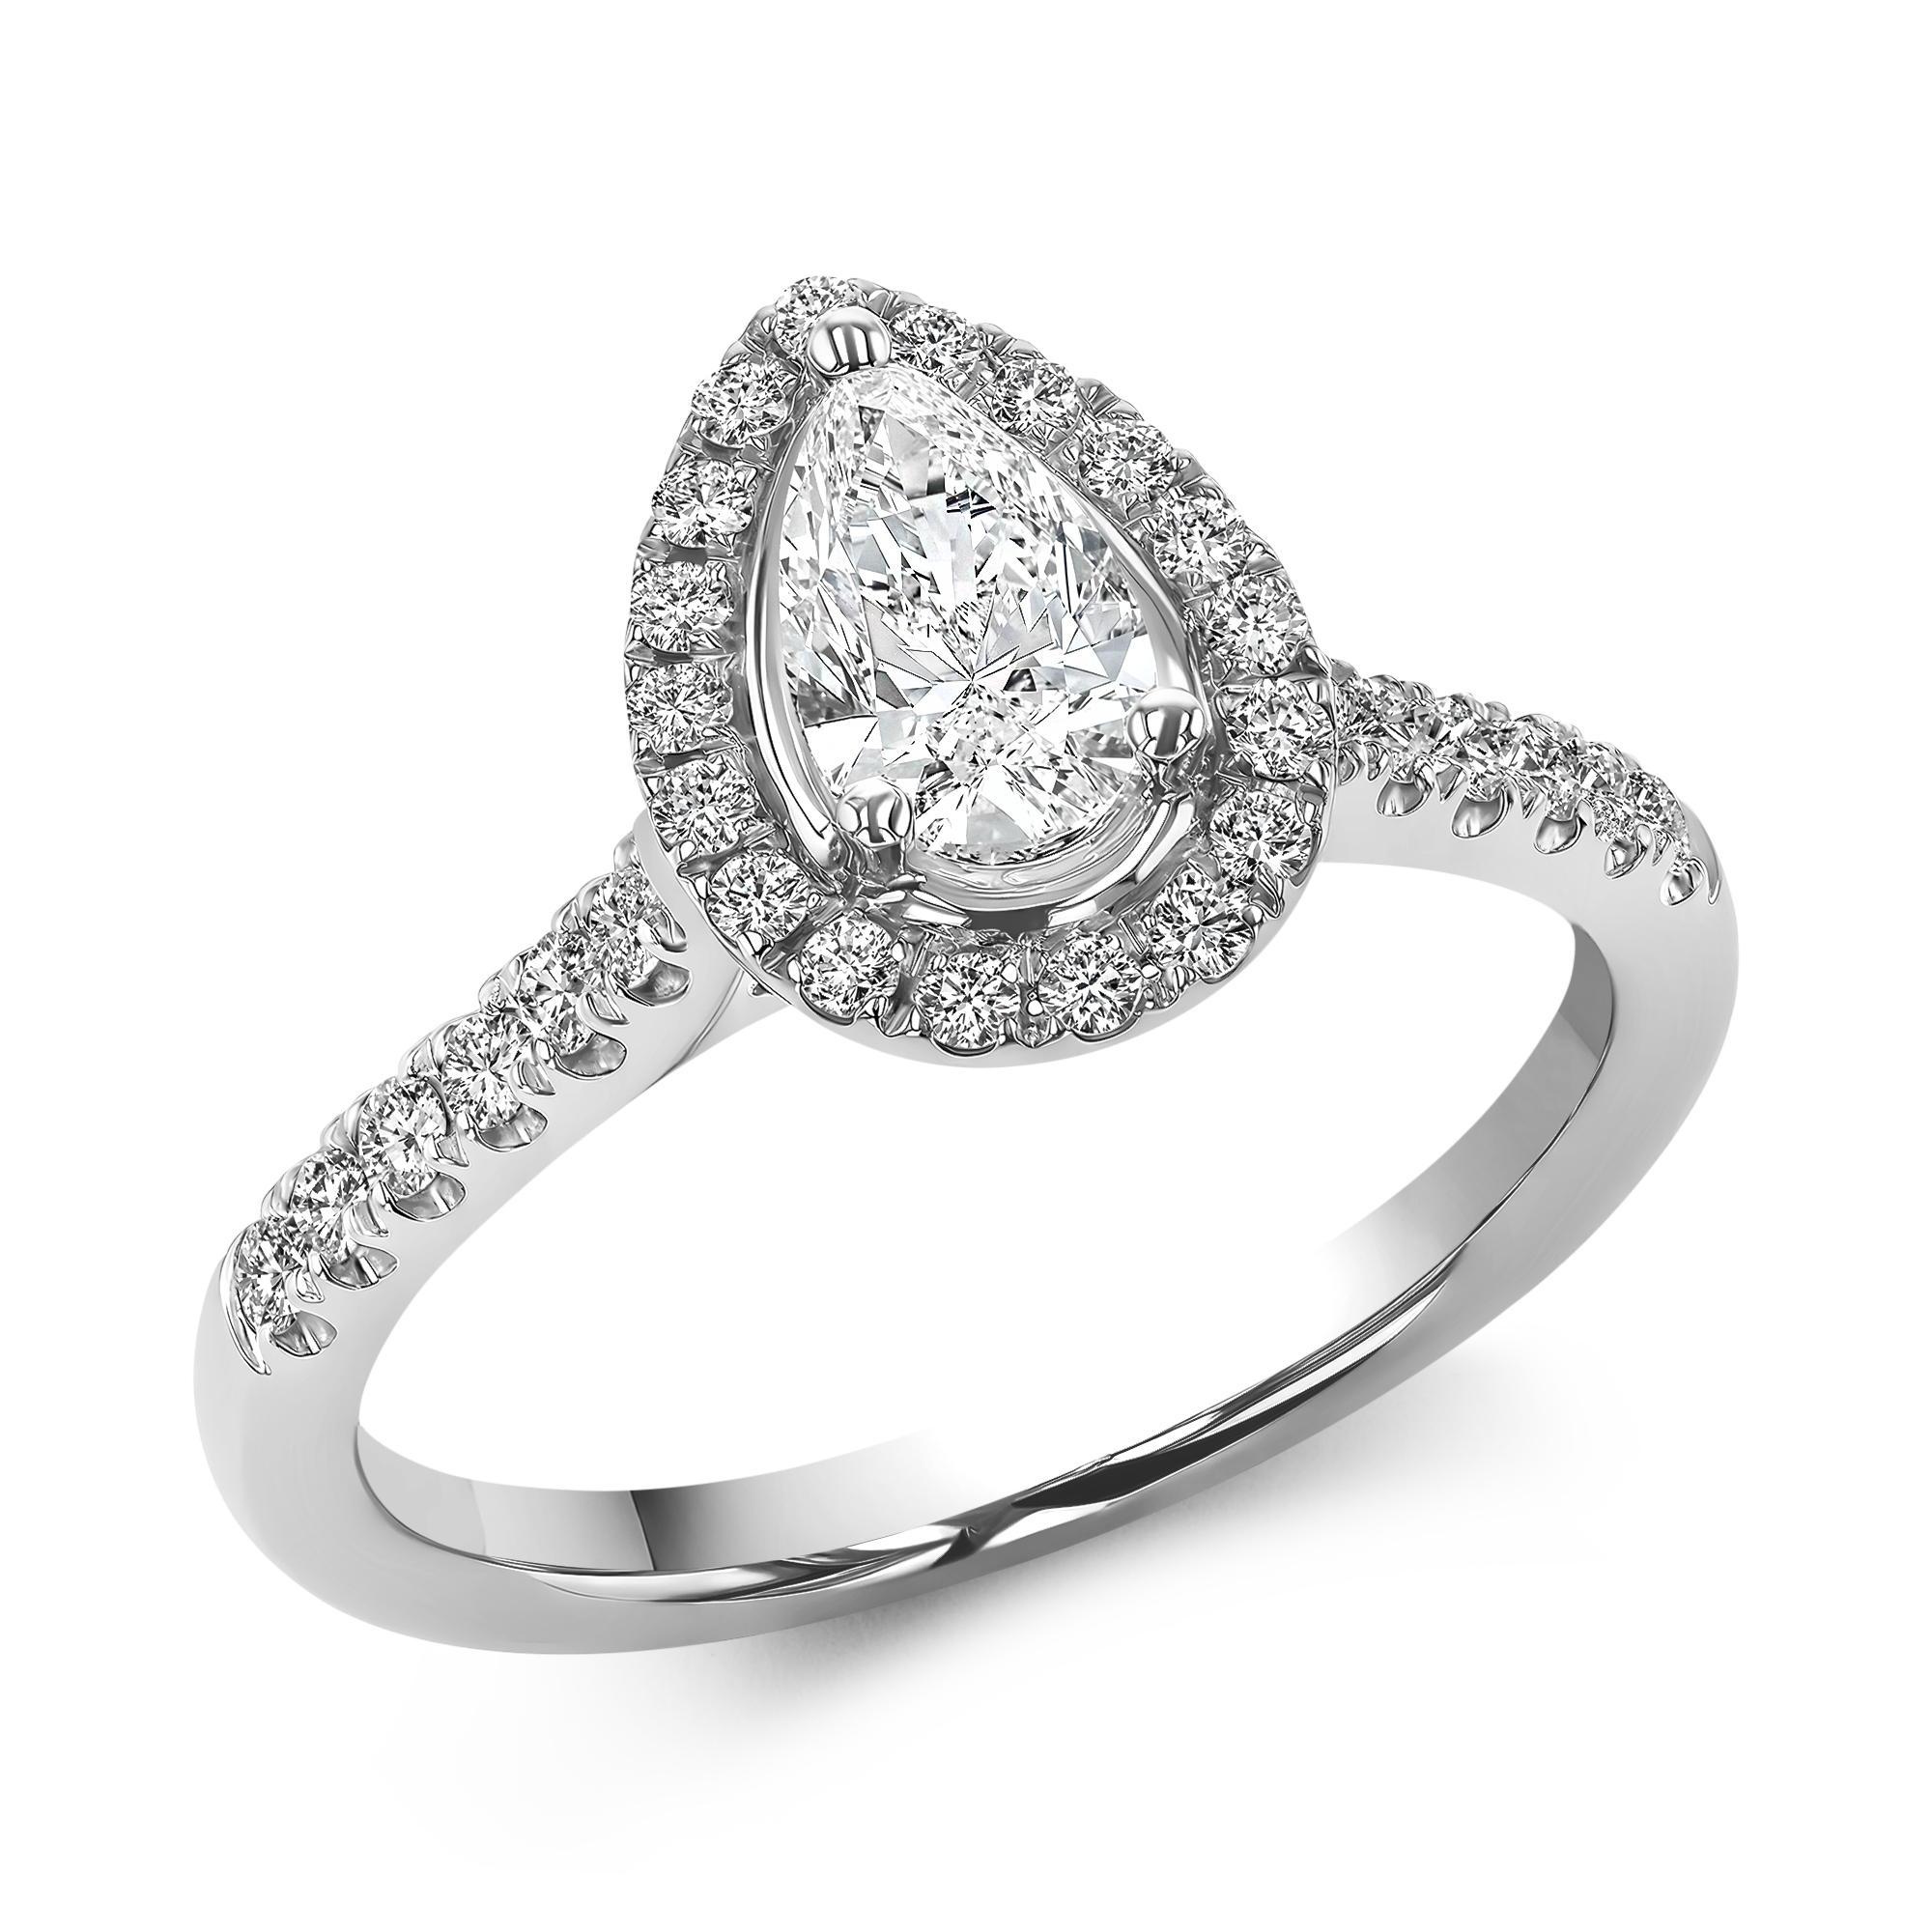 Celestial 0.53ct Diamond Cluster Ring Pear Cut, Claw Set_1